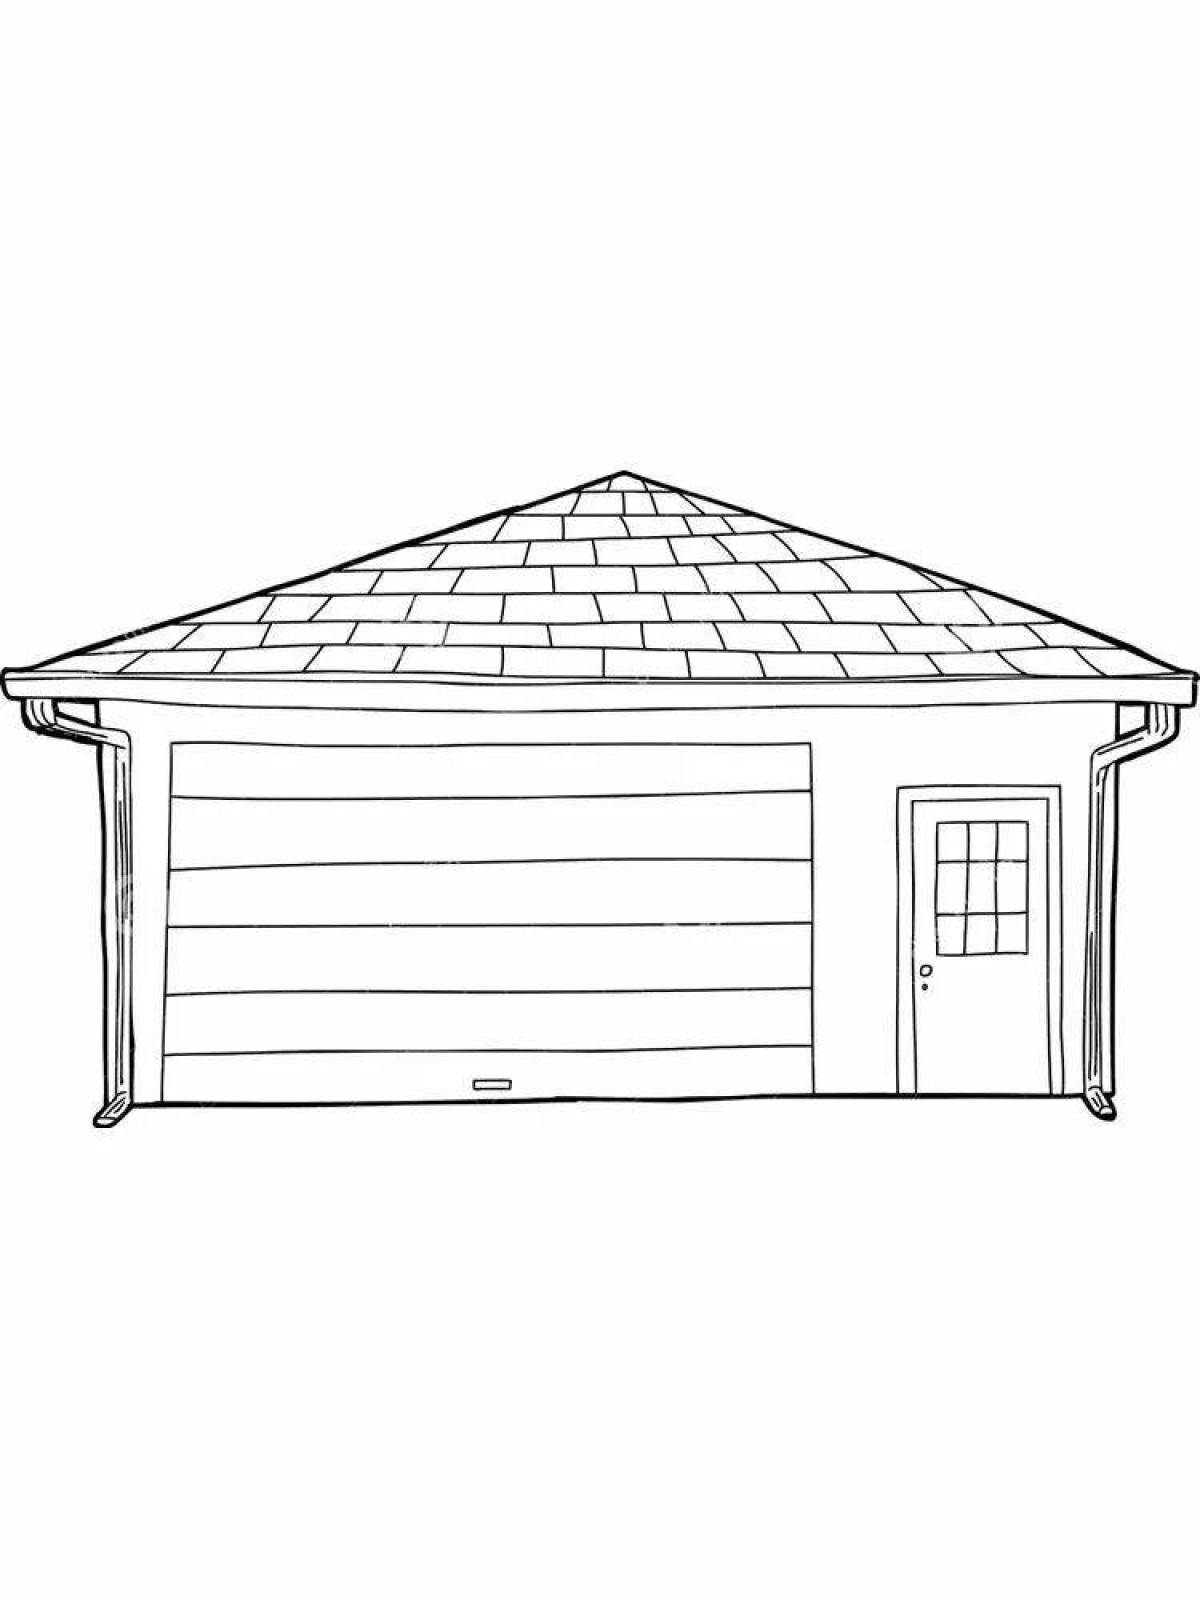 Garage coloring page coloring page